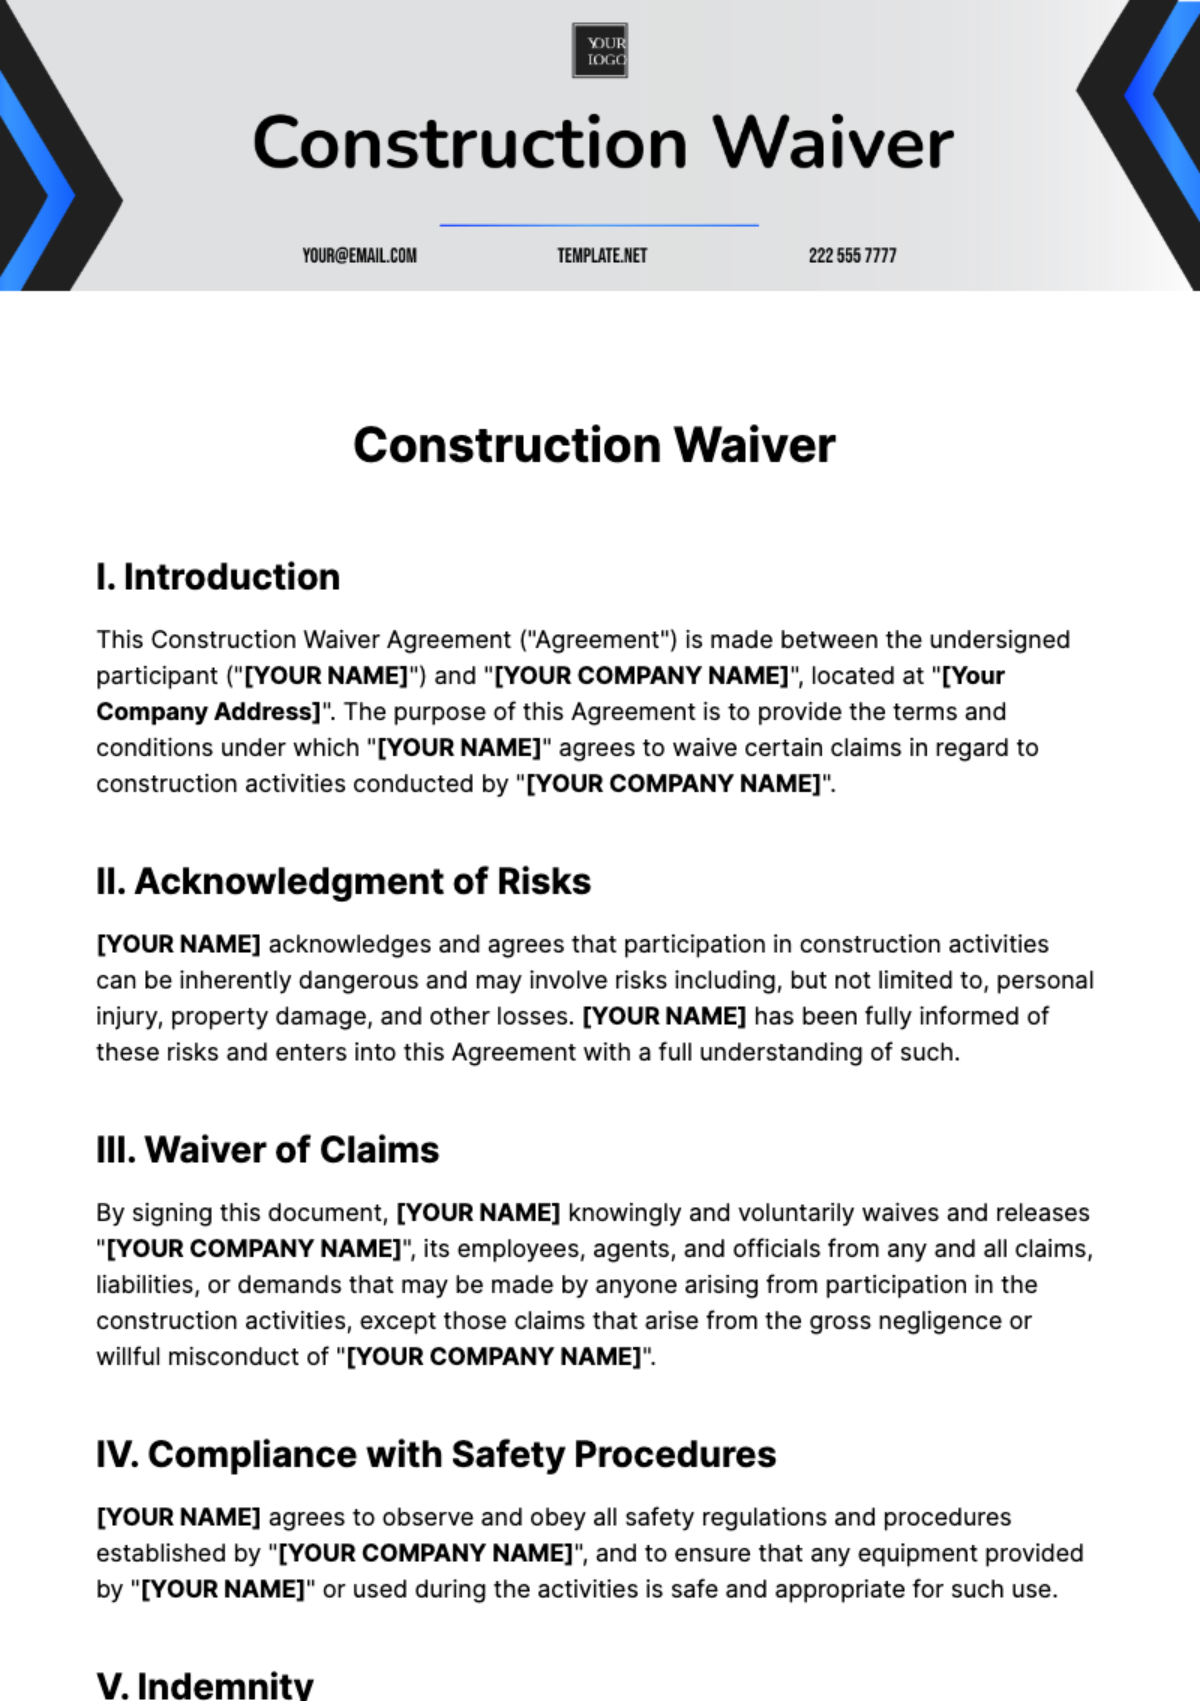 Free Construction Waiver Template